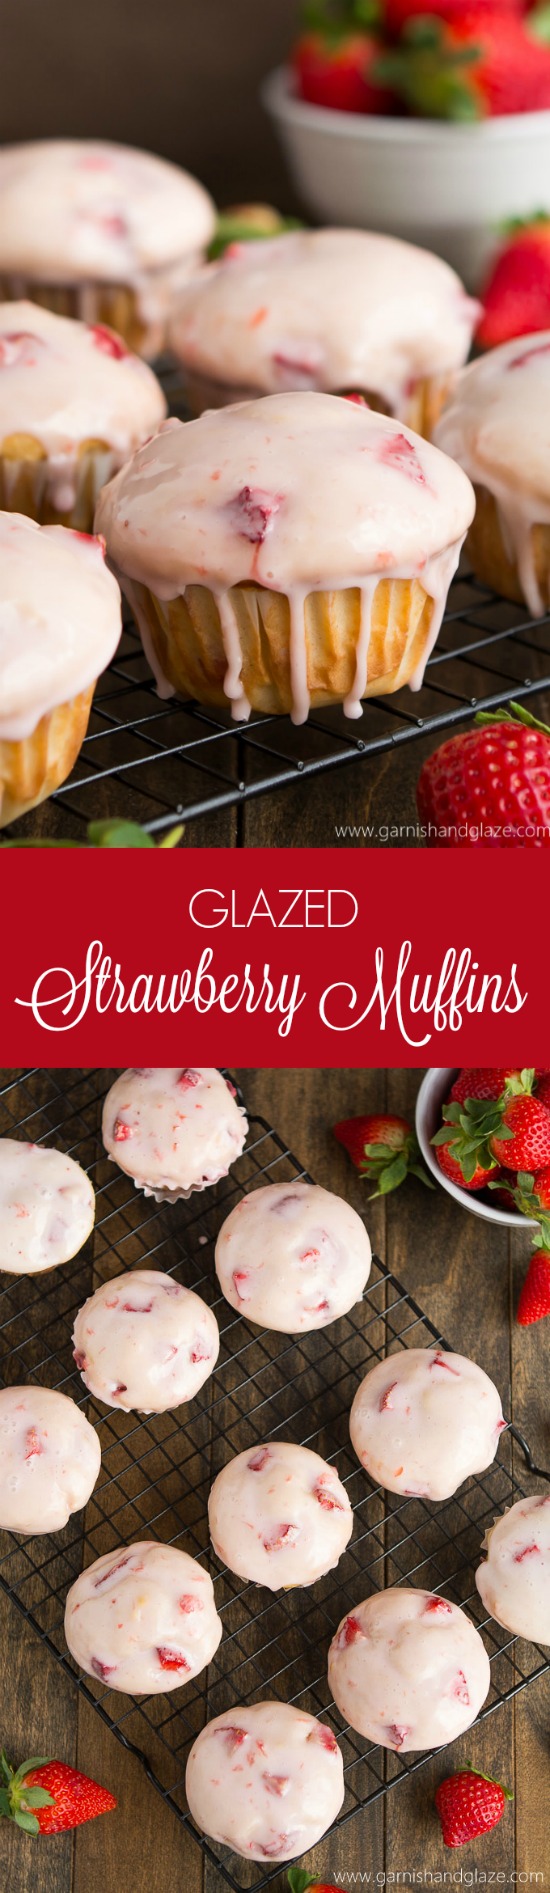  Soft and tender Glazed Strawberry Muffins are the perfect sweet treat to share on Valentine's Day.